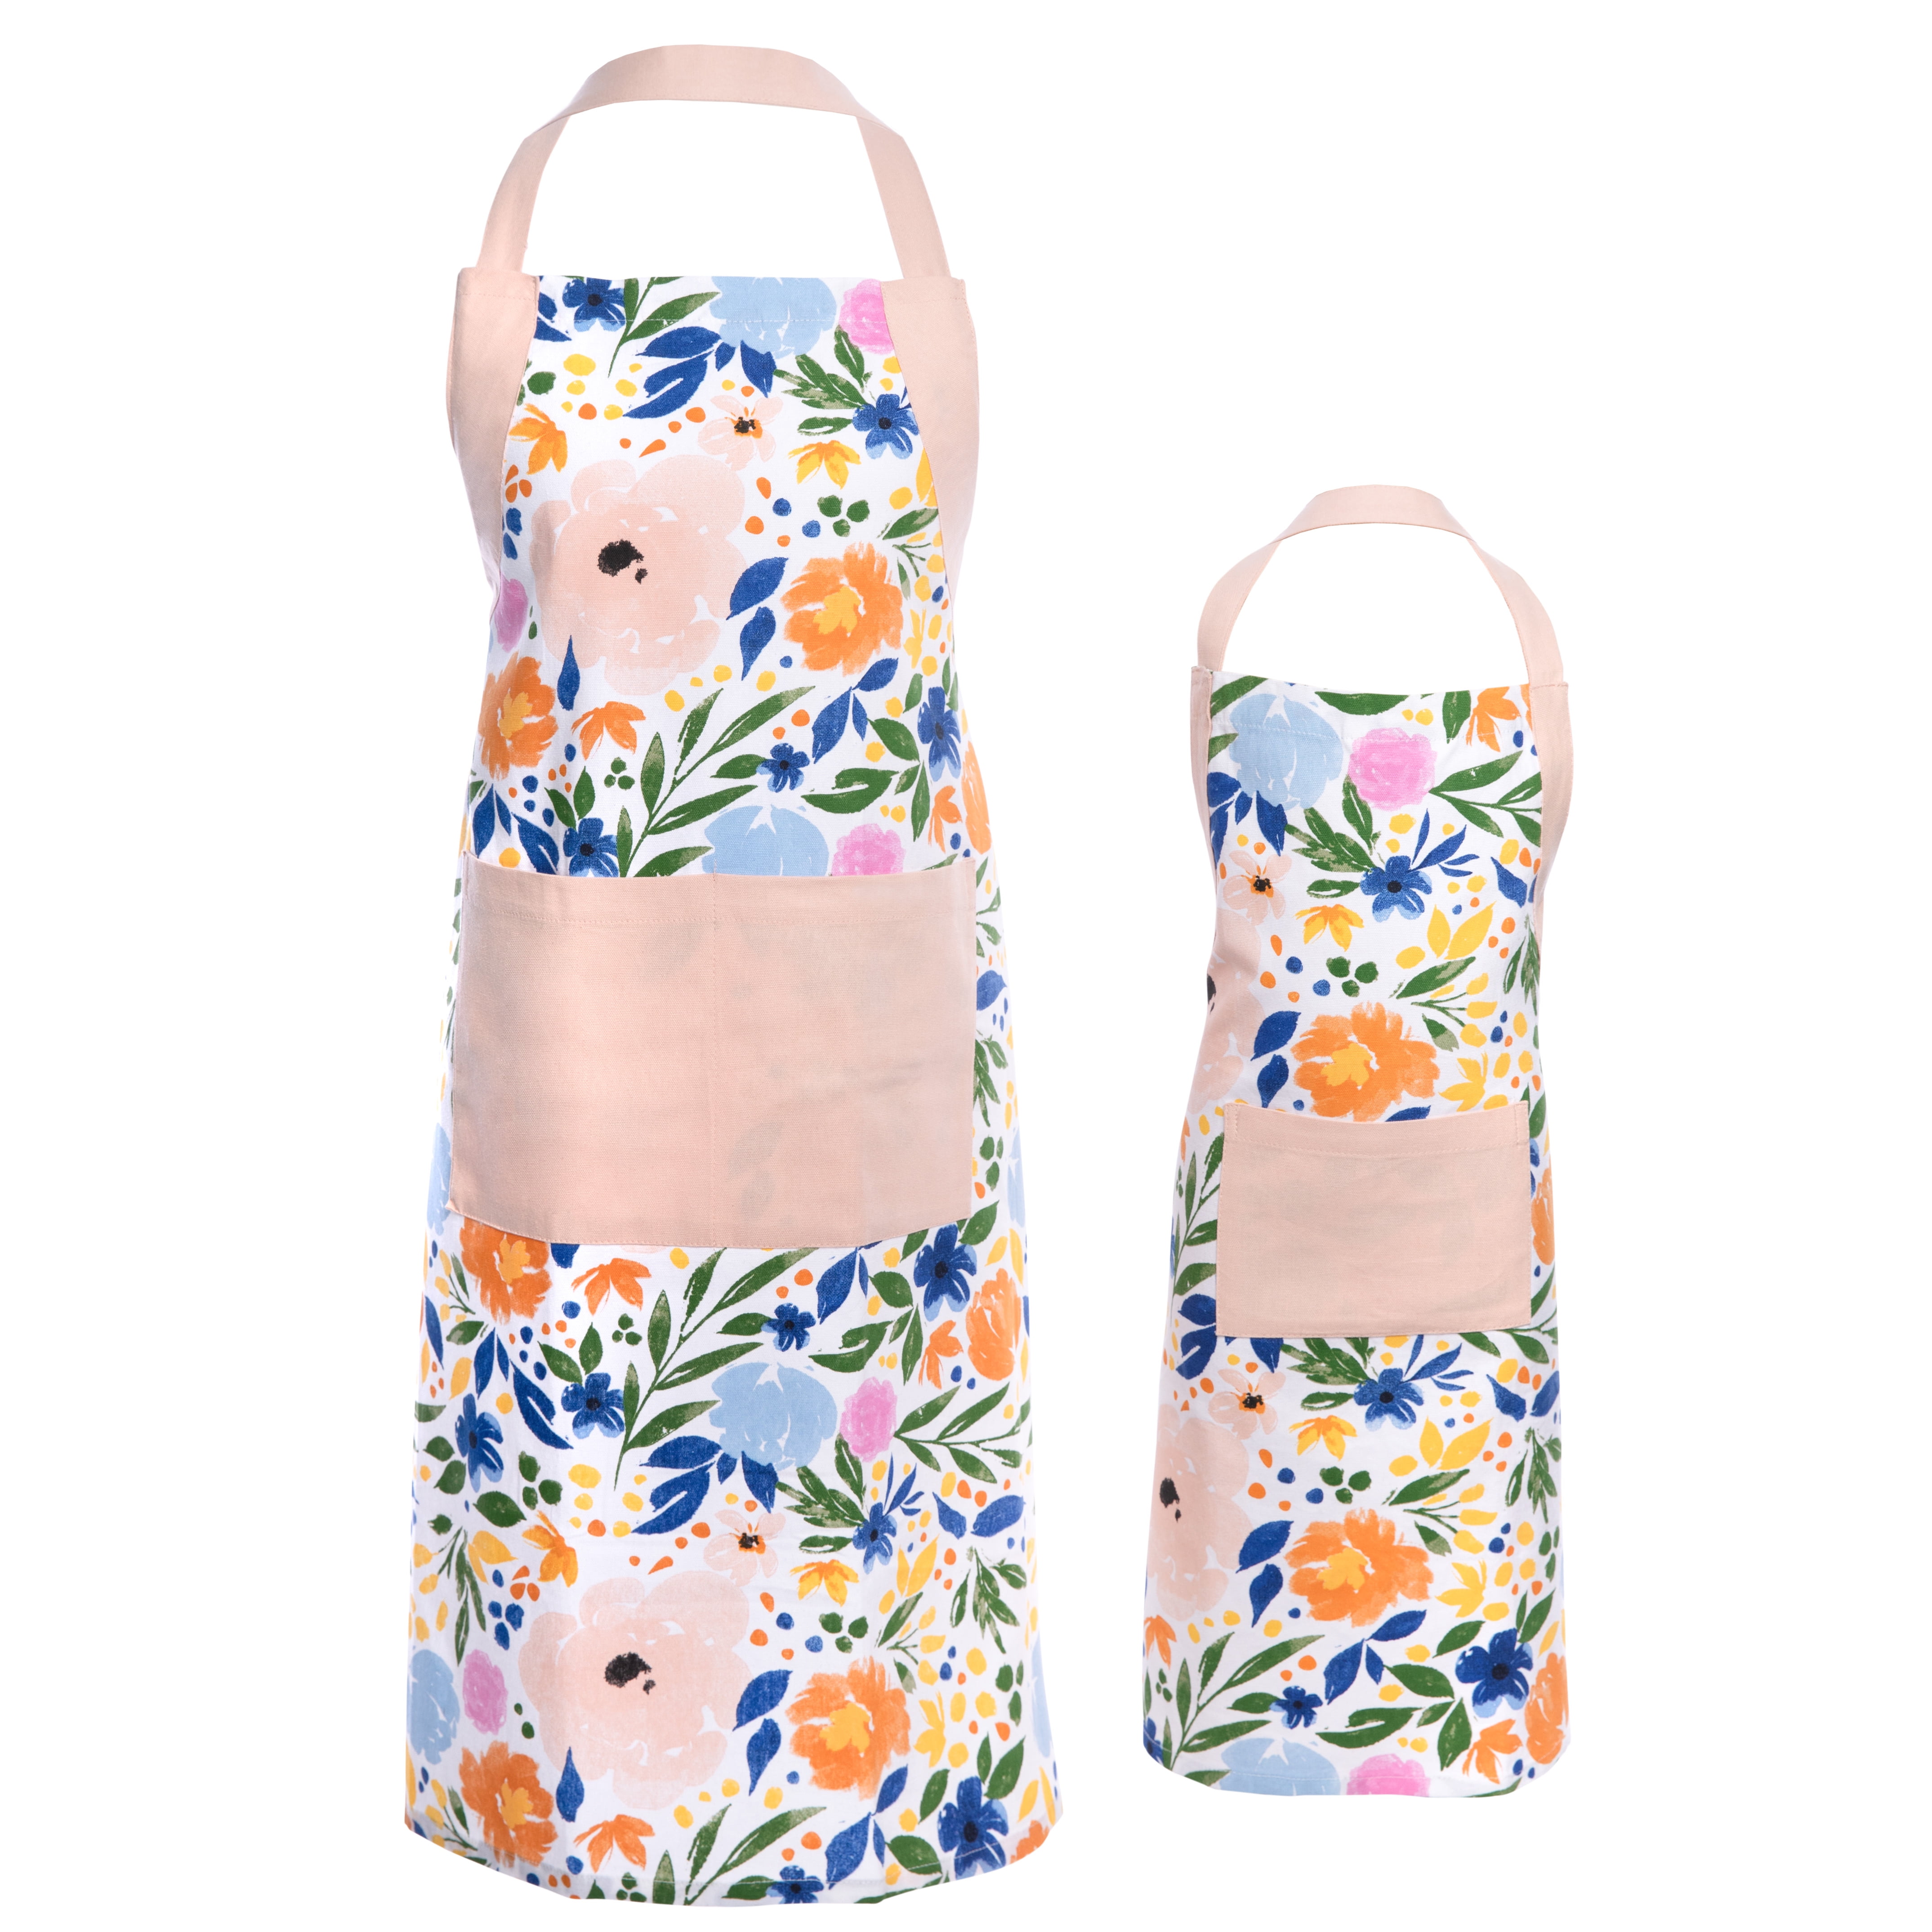 Mom and Me Aprons Gift Set - Heirloomed